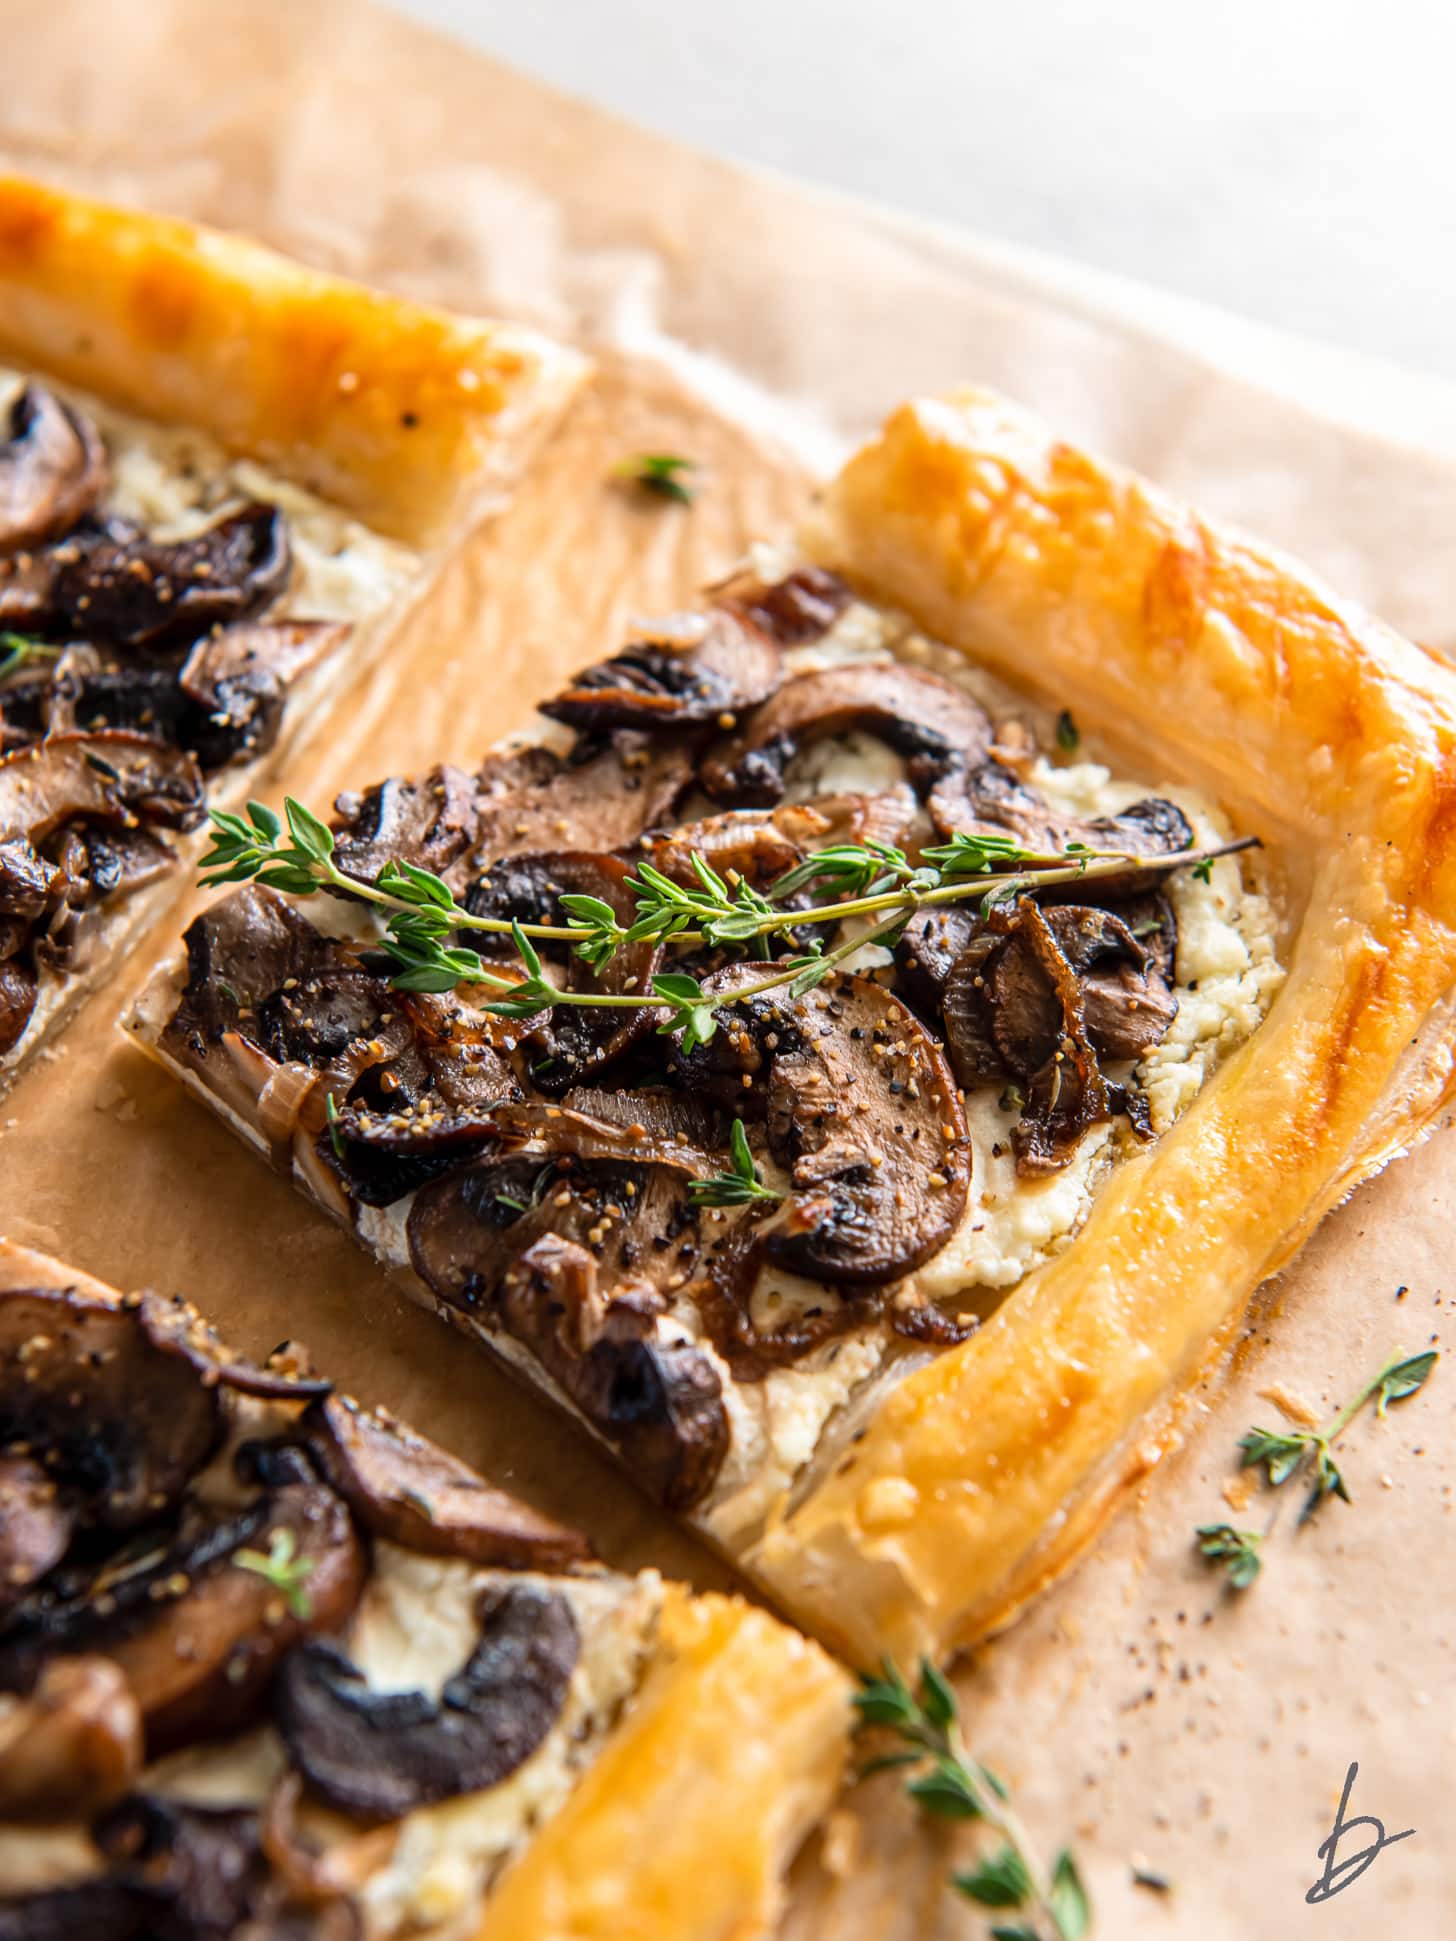 mushroom tart slice with puff pastry and sprig of thyme for garnish.